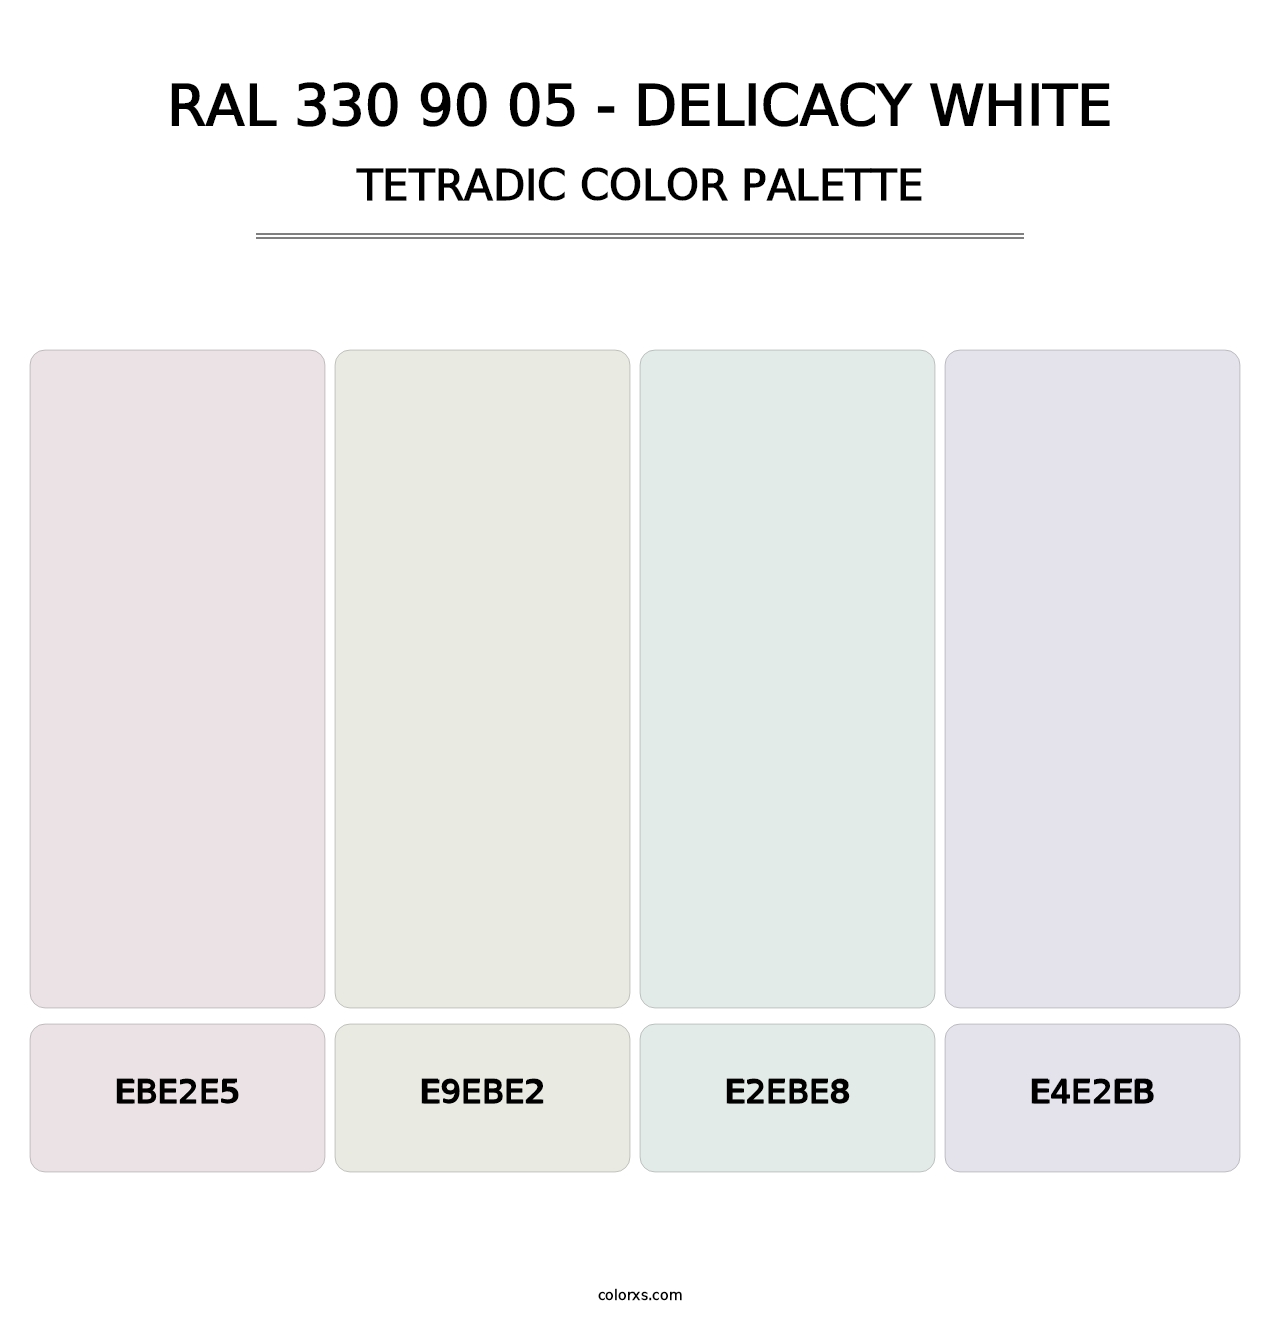 RAL 330 90 05 - Delicacy White - Tetradic Color Palette